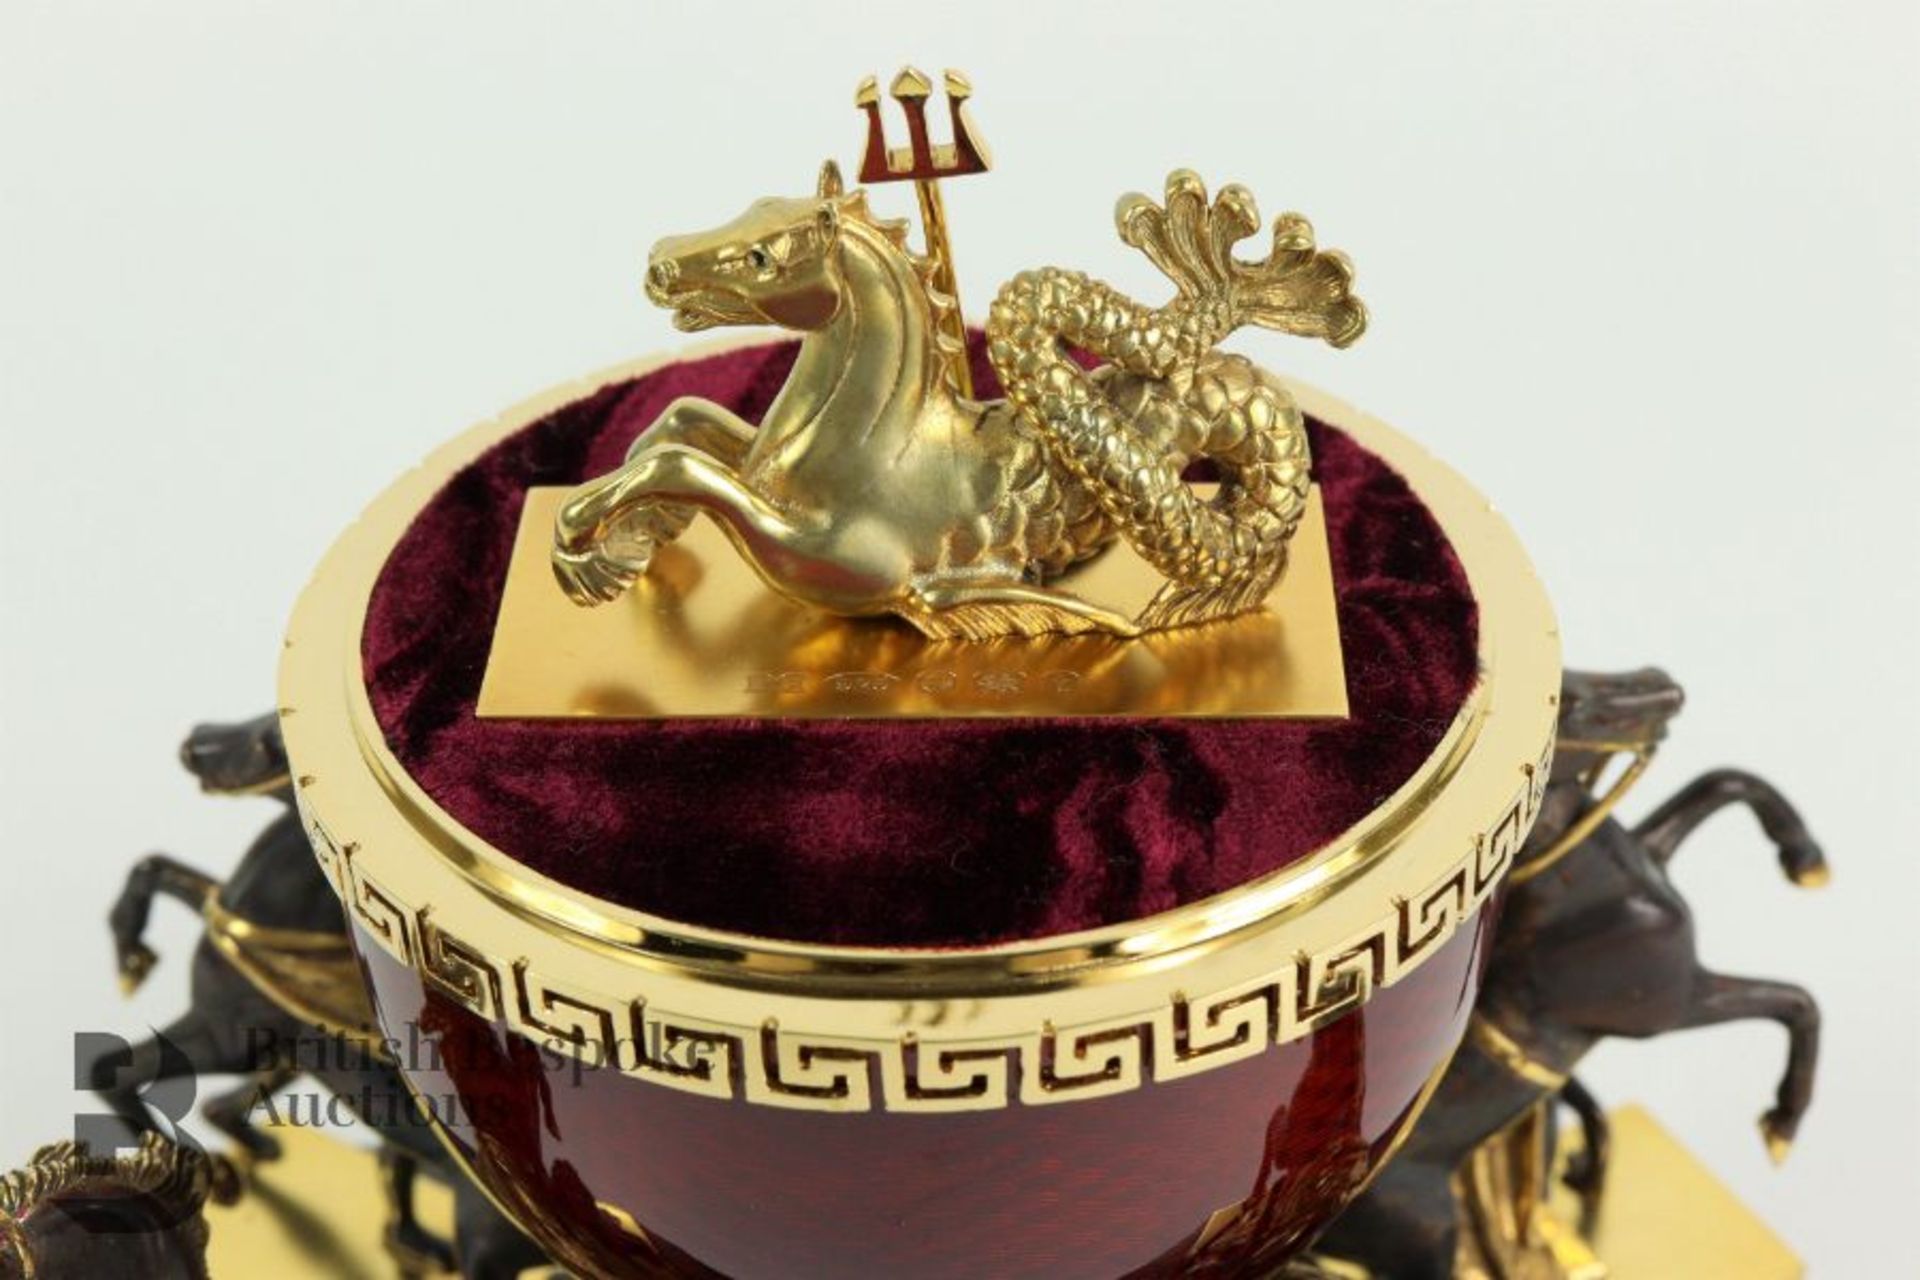 Theo Faberge Anichkov Egg - St Petersburg Collection - Image 25 of 37